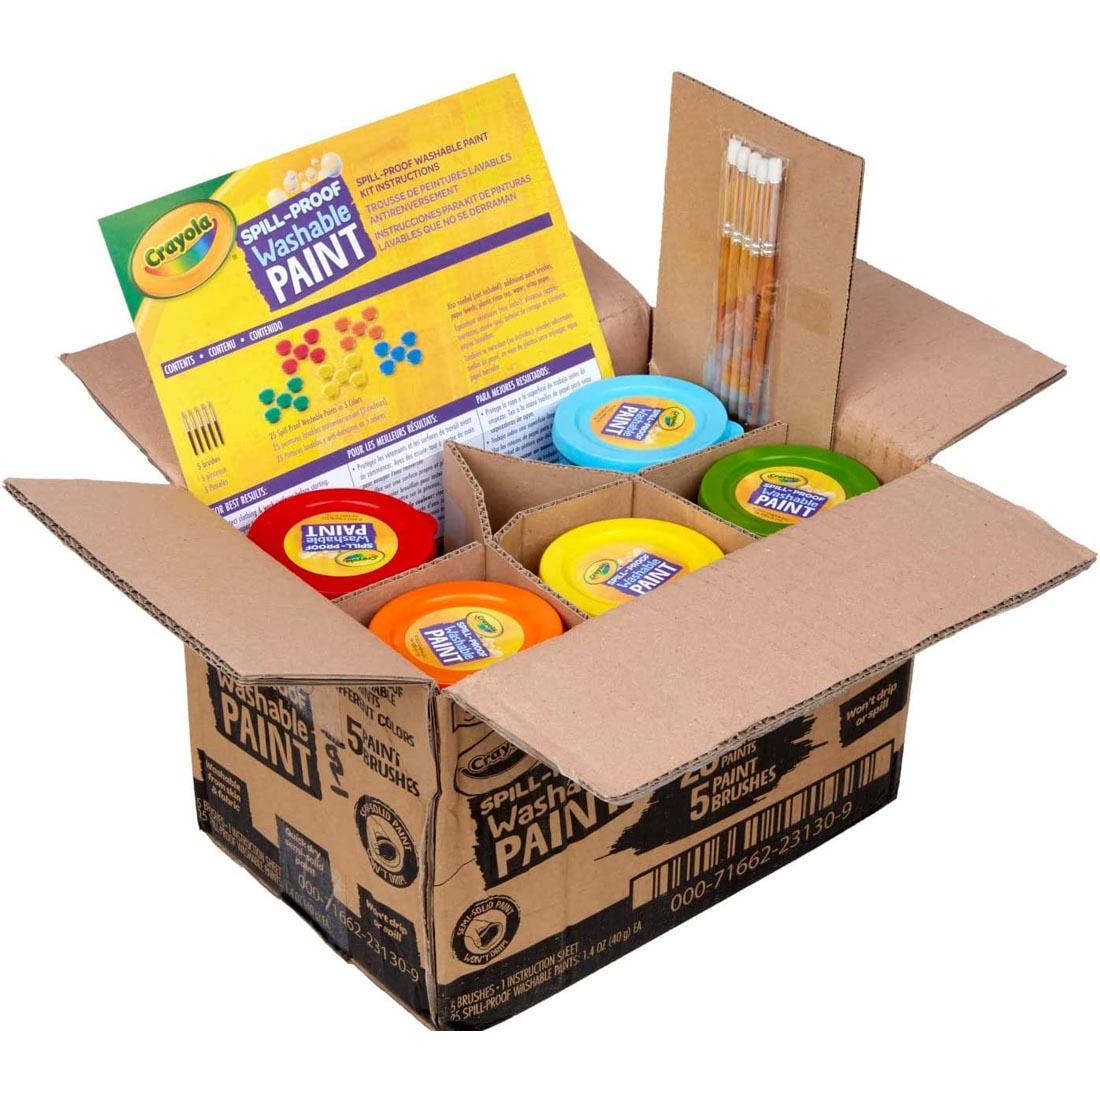 Crayola Spill Proof Washable Paint Classpack box with top open